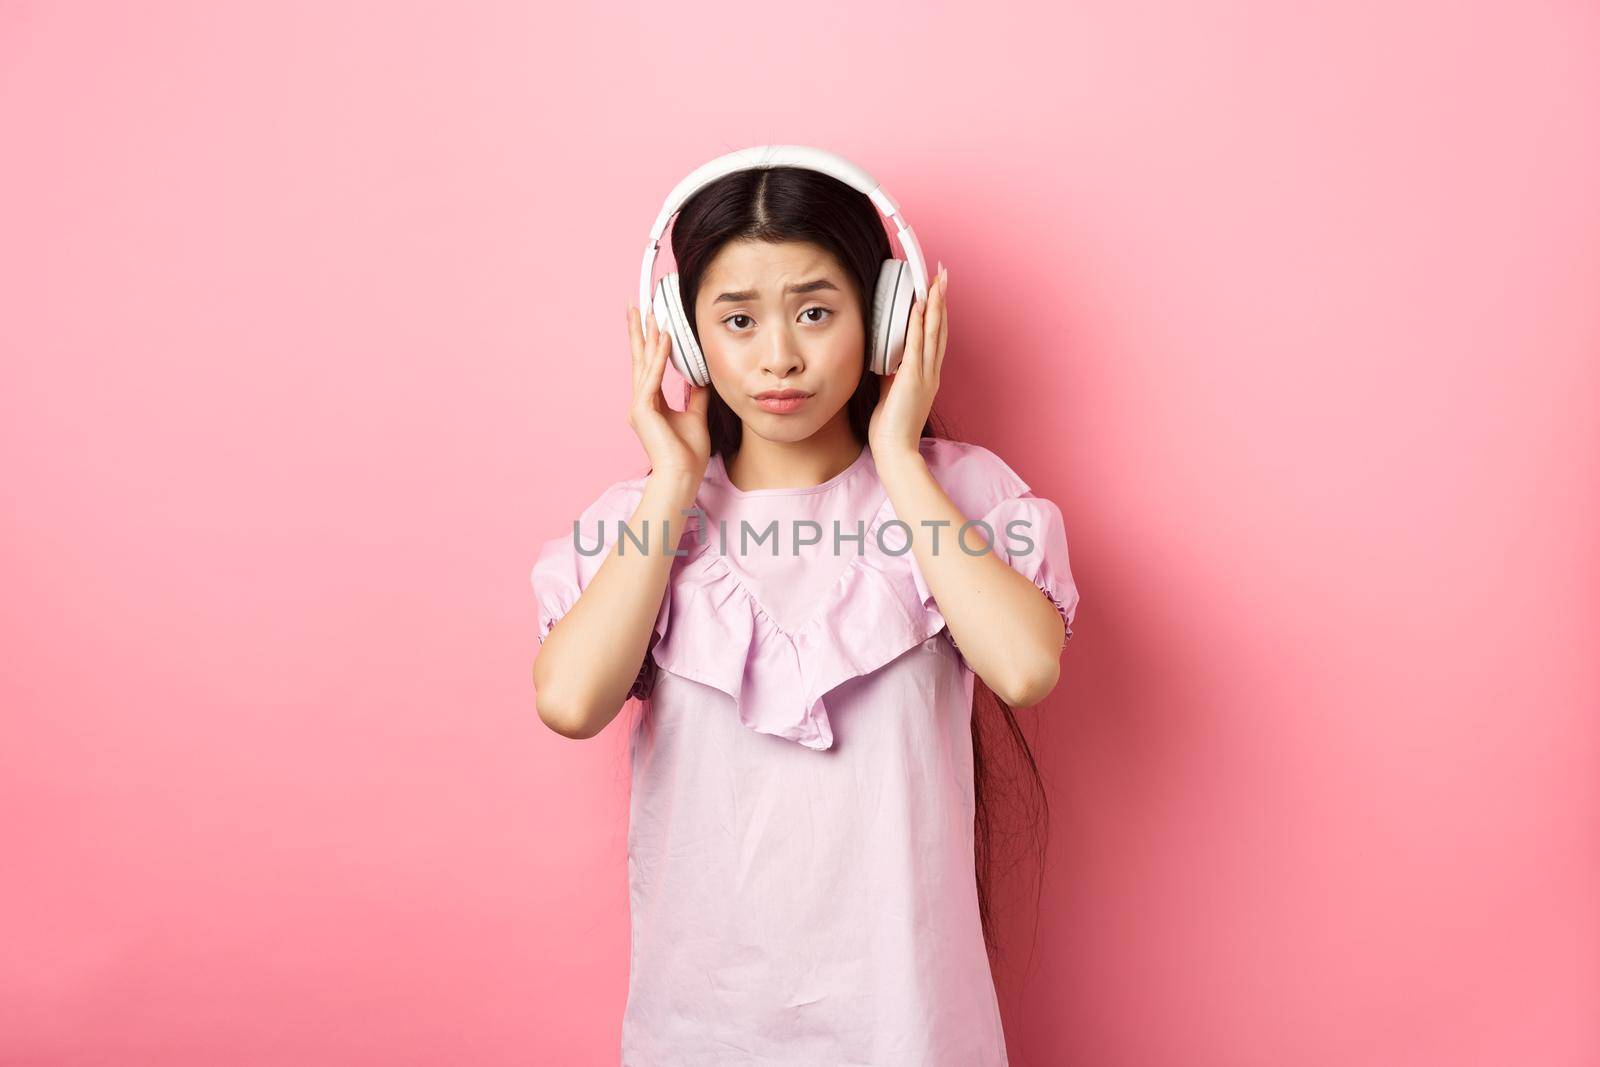 Skeptical girl unamused with song, listening music in headphones and frowning displeased, standing against pink background.